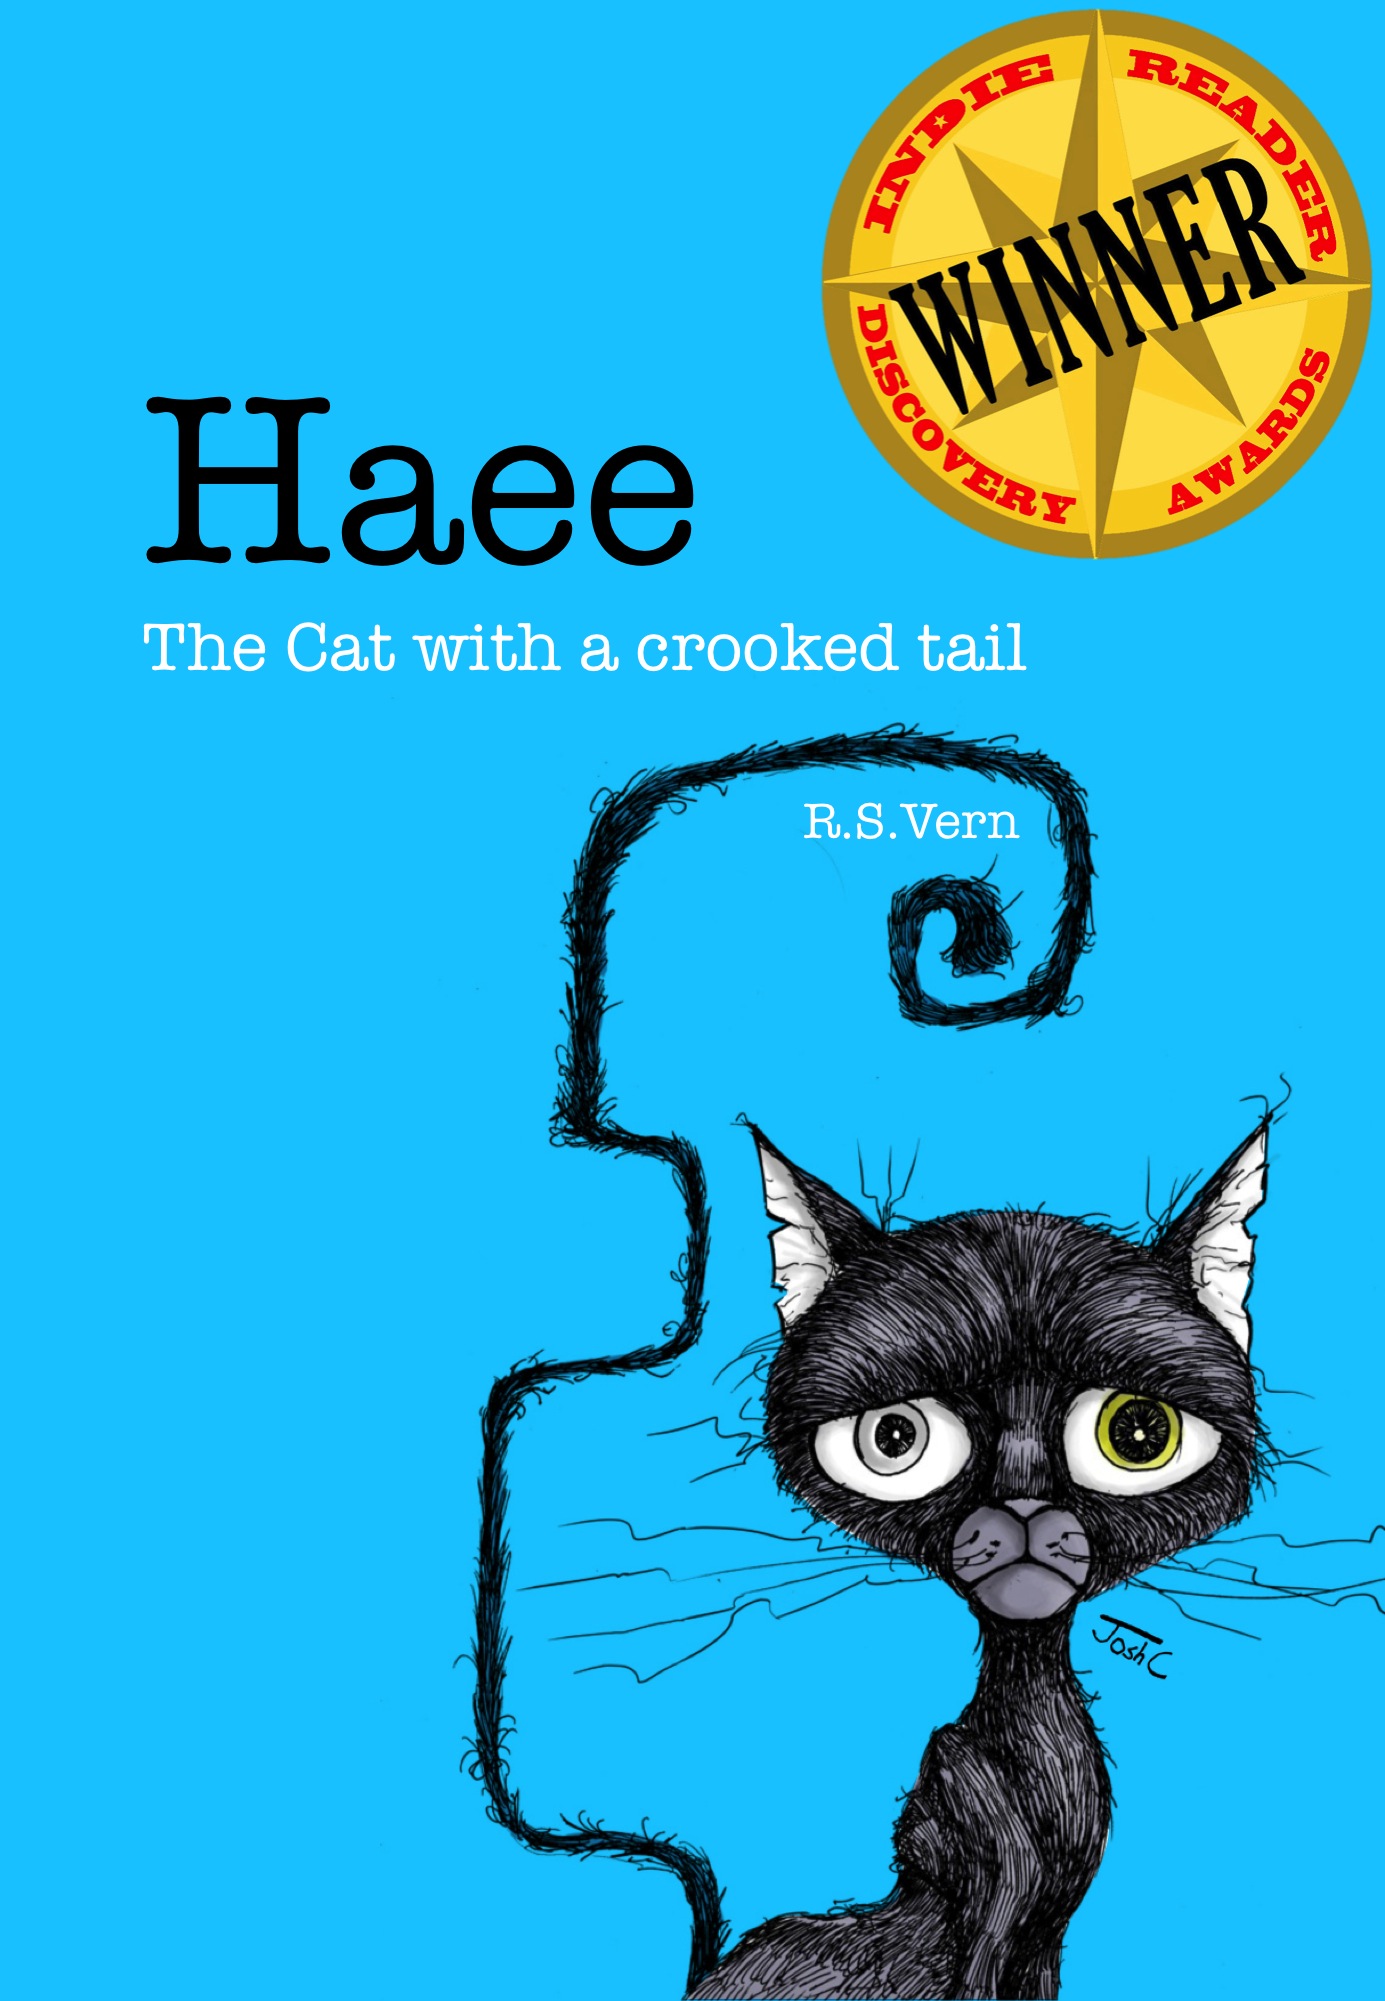 Haee The cat with a crooked tail (Haee and the other middlings, #1)